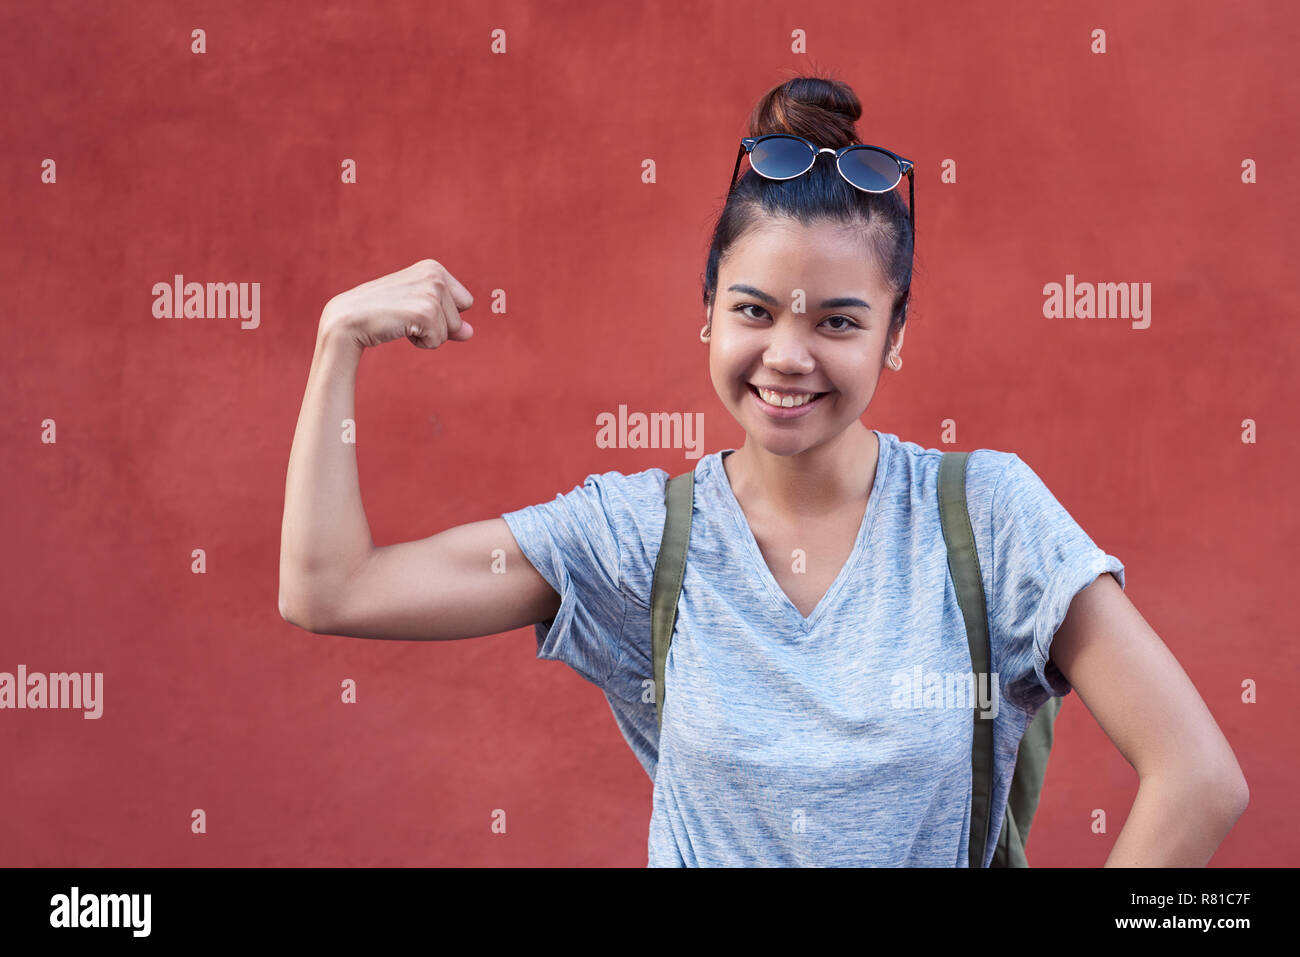 Young Asian woman smiling while humorously flexing her bicep outside Stock Photo